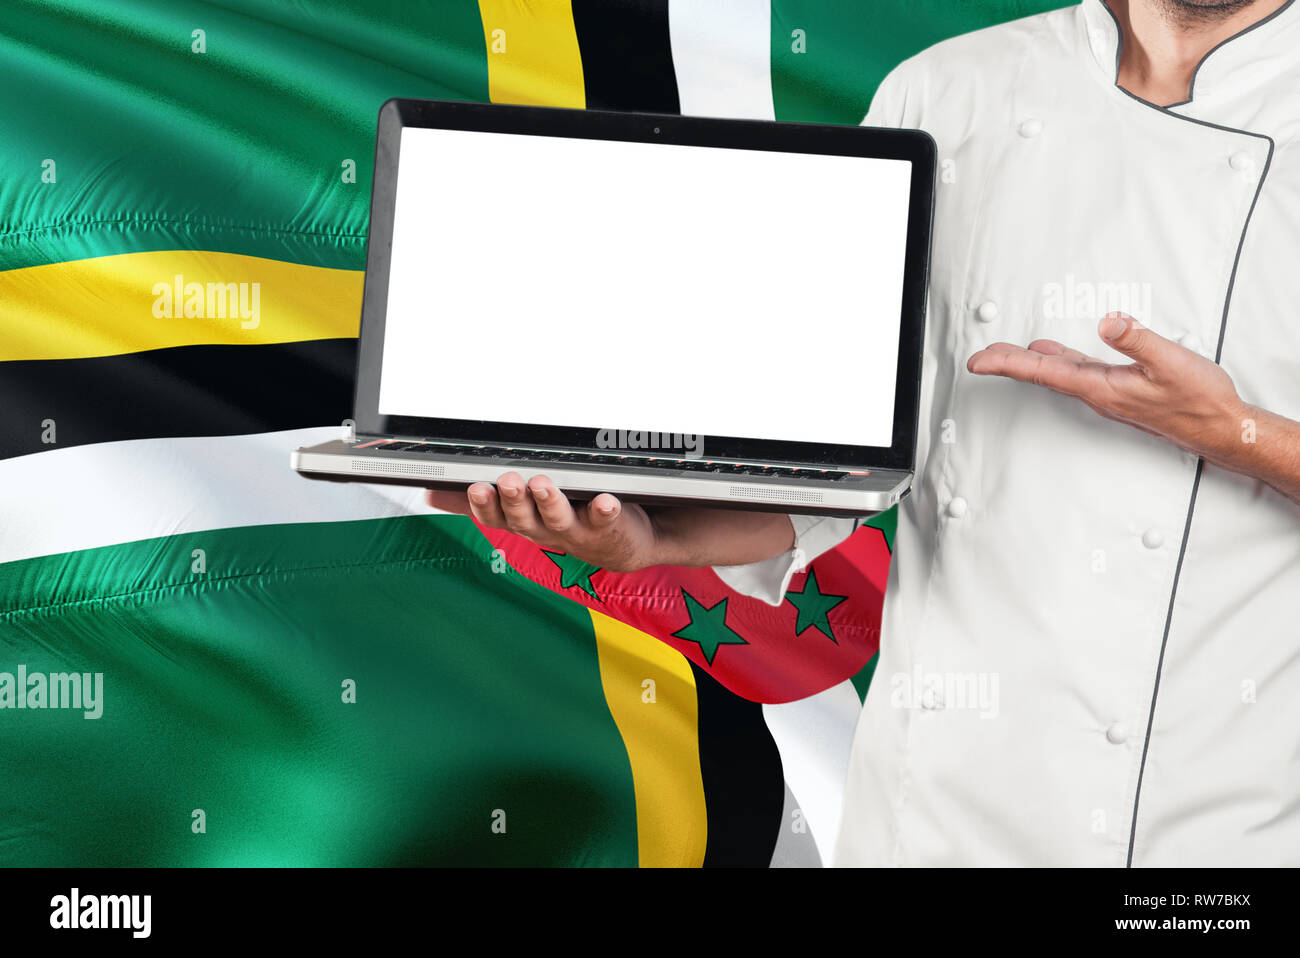 Dominican Chef holding laptop with blank screen on Dominica flag background. Cook wearing uniform and pointing laptop for copy space. Stock Photo